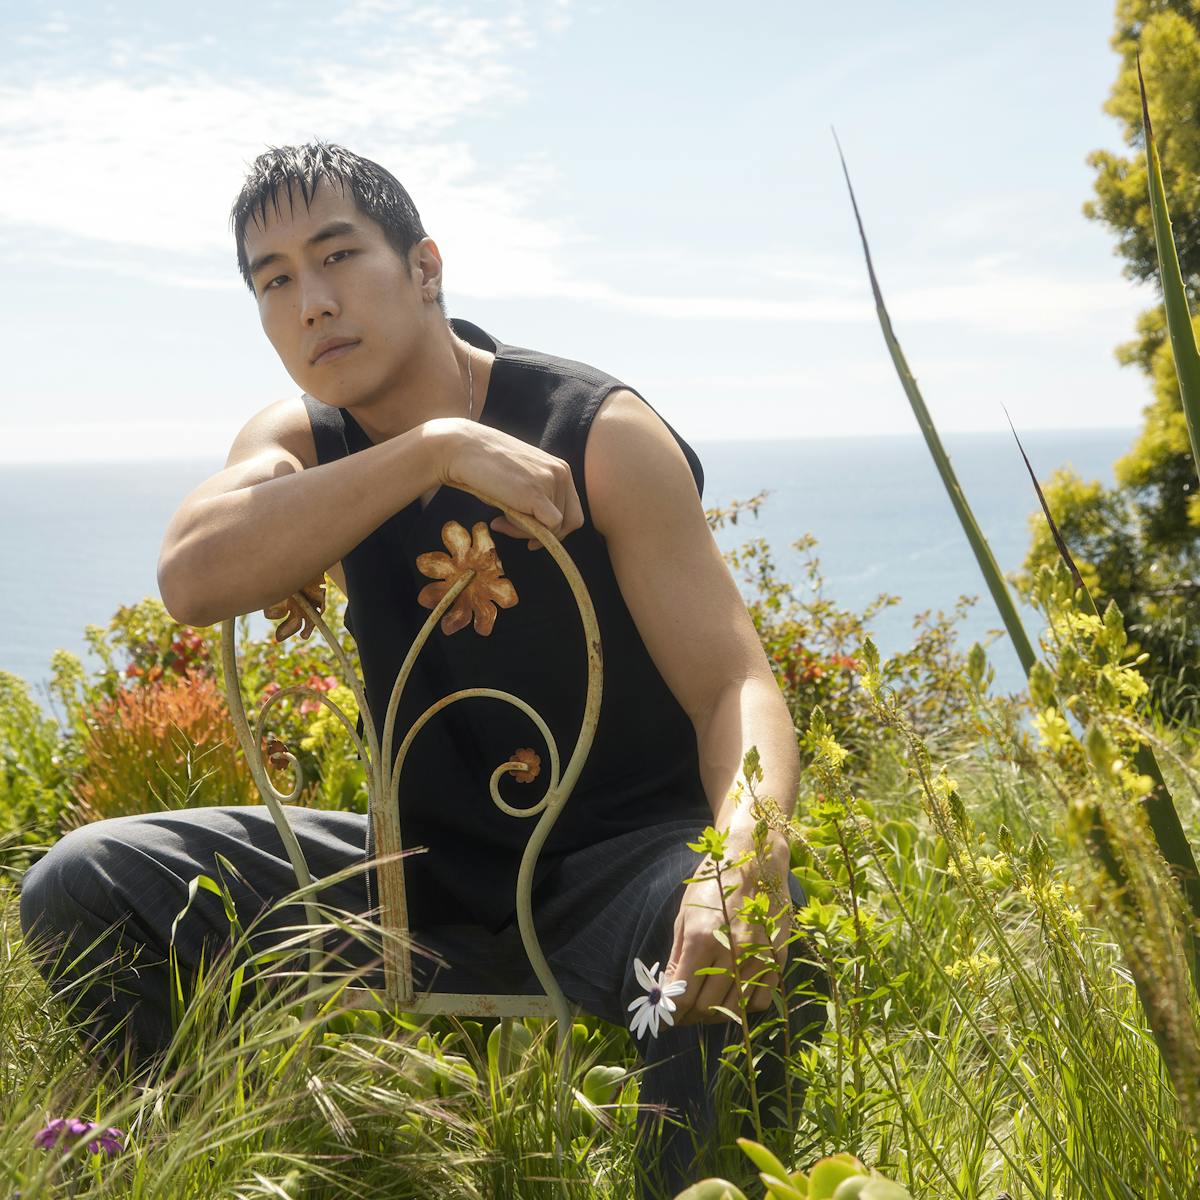 Young Mazino looks like the original man in this sunny, verdant shot. He sits on a curlicue metal chair and wears all black—including a black tank top. His hair is combed forward and he smizes at the camera. 